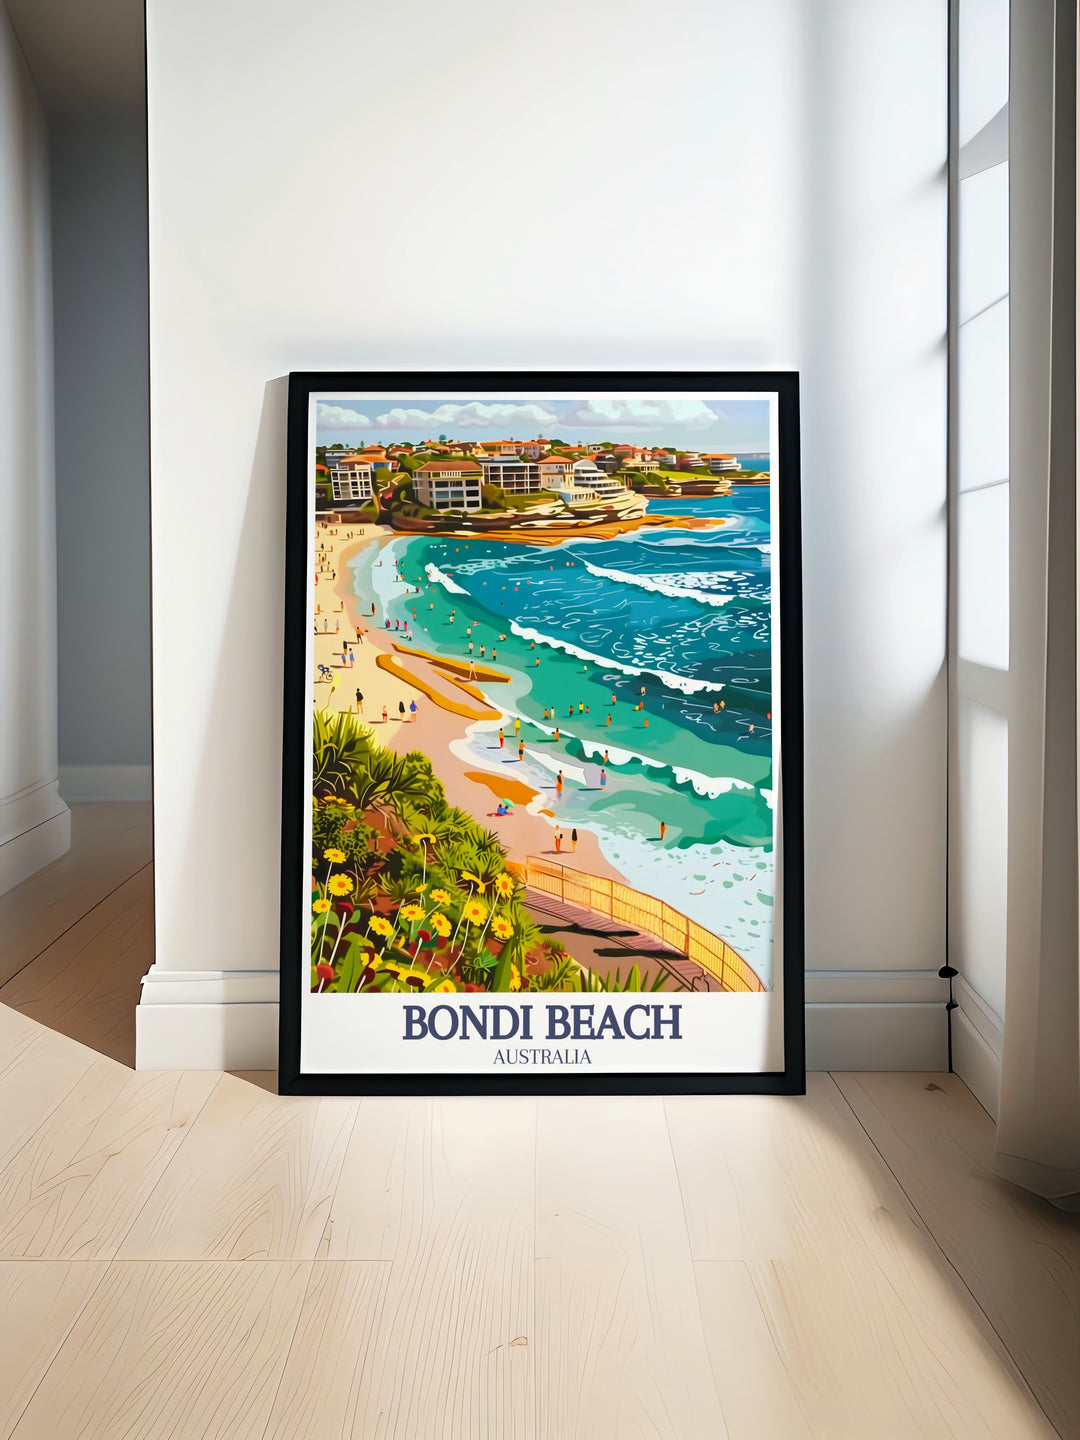 Vintage poster of Sydney Harbour featuring the iconic Sydney Opera House and Harbour Bridge. Bondi to Coogee Coastal Walk Bondi prints showcase the vibrant atmosphere and stunning scenery, perfect for adding Australia art to your home decor.